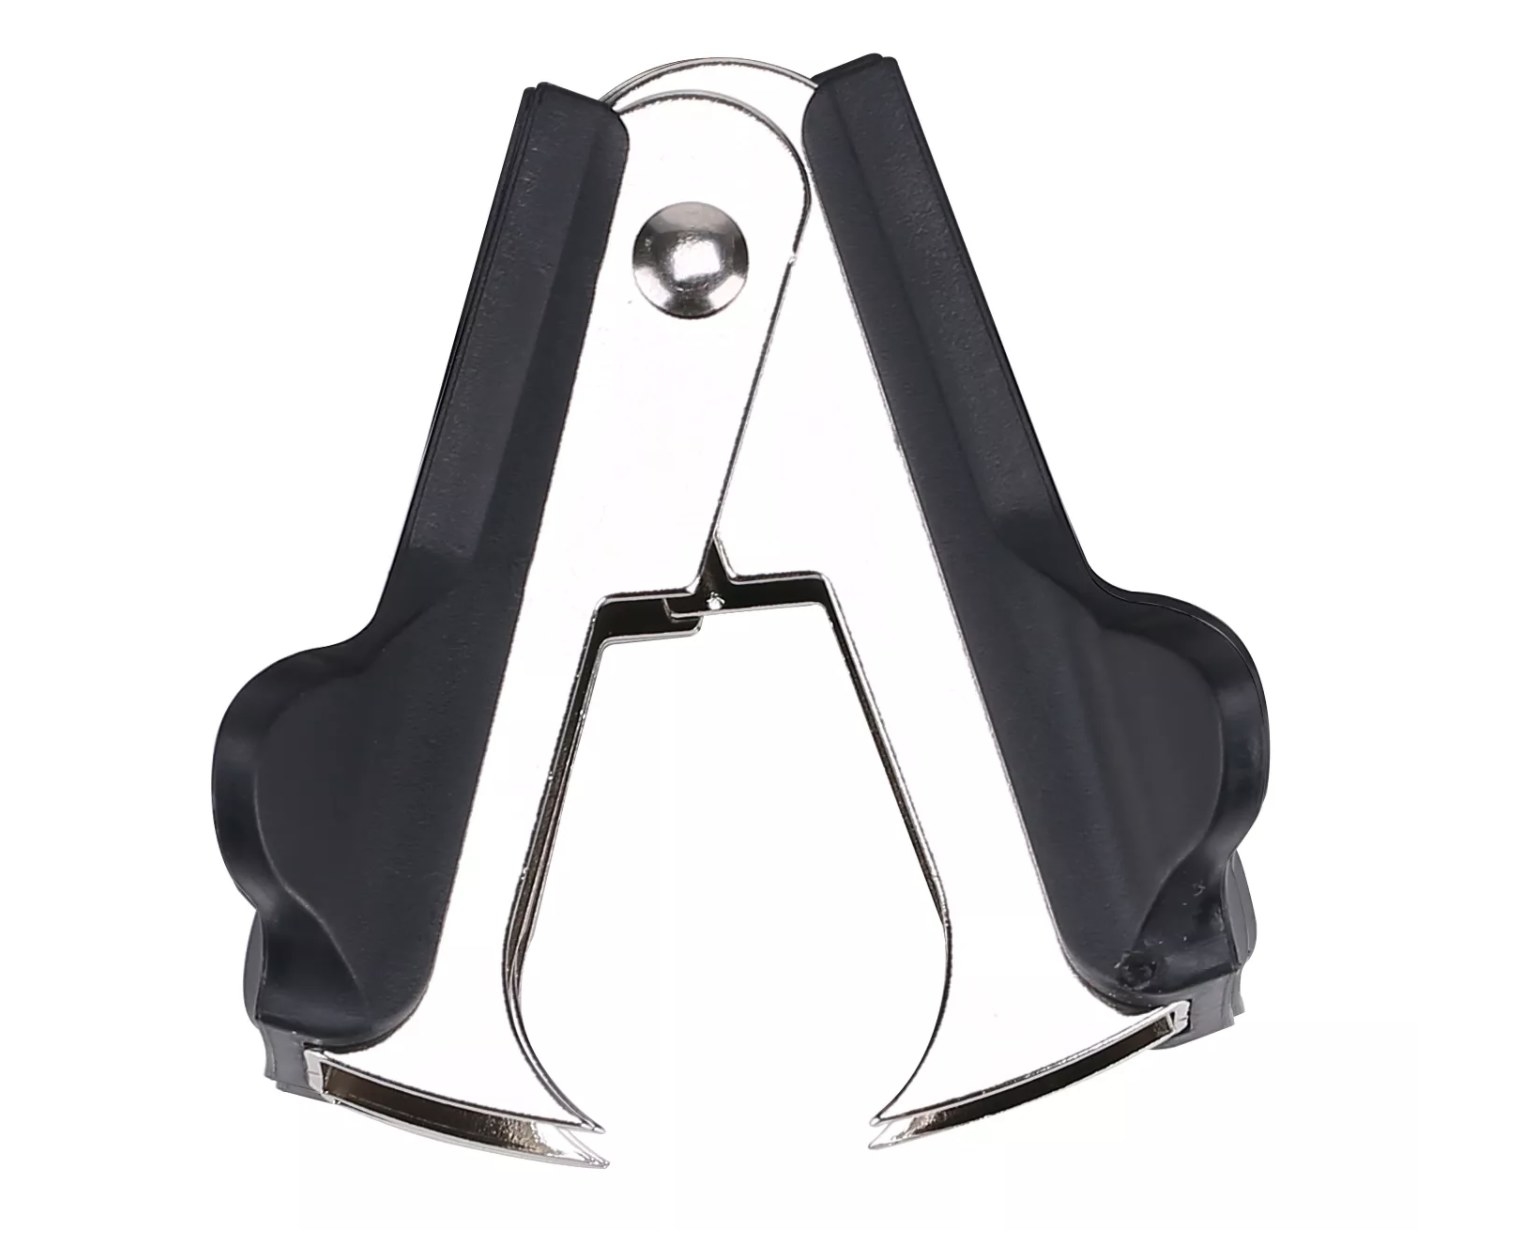 The black and steel staple remover 